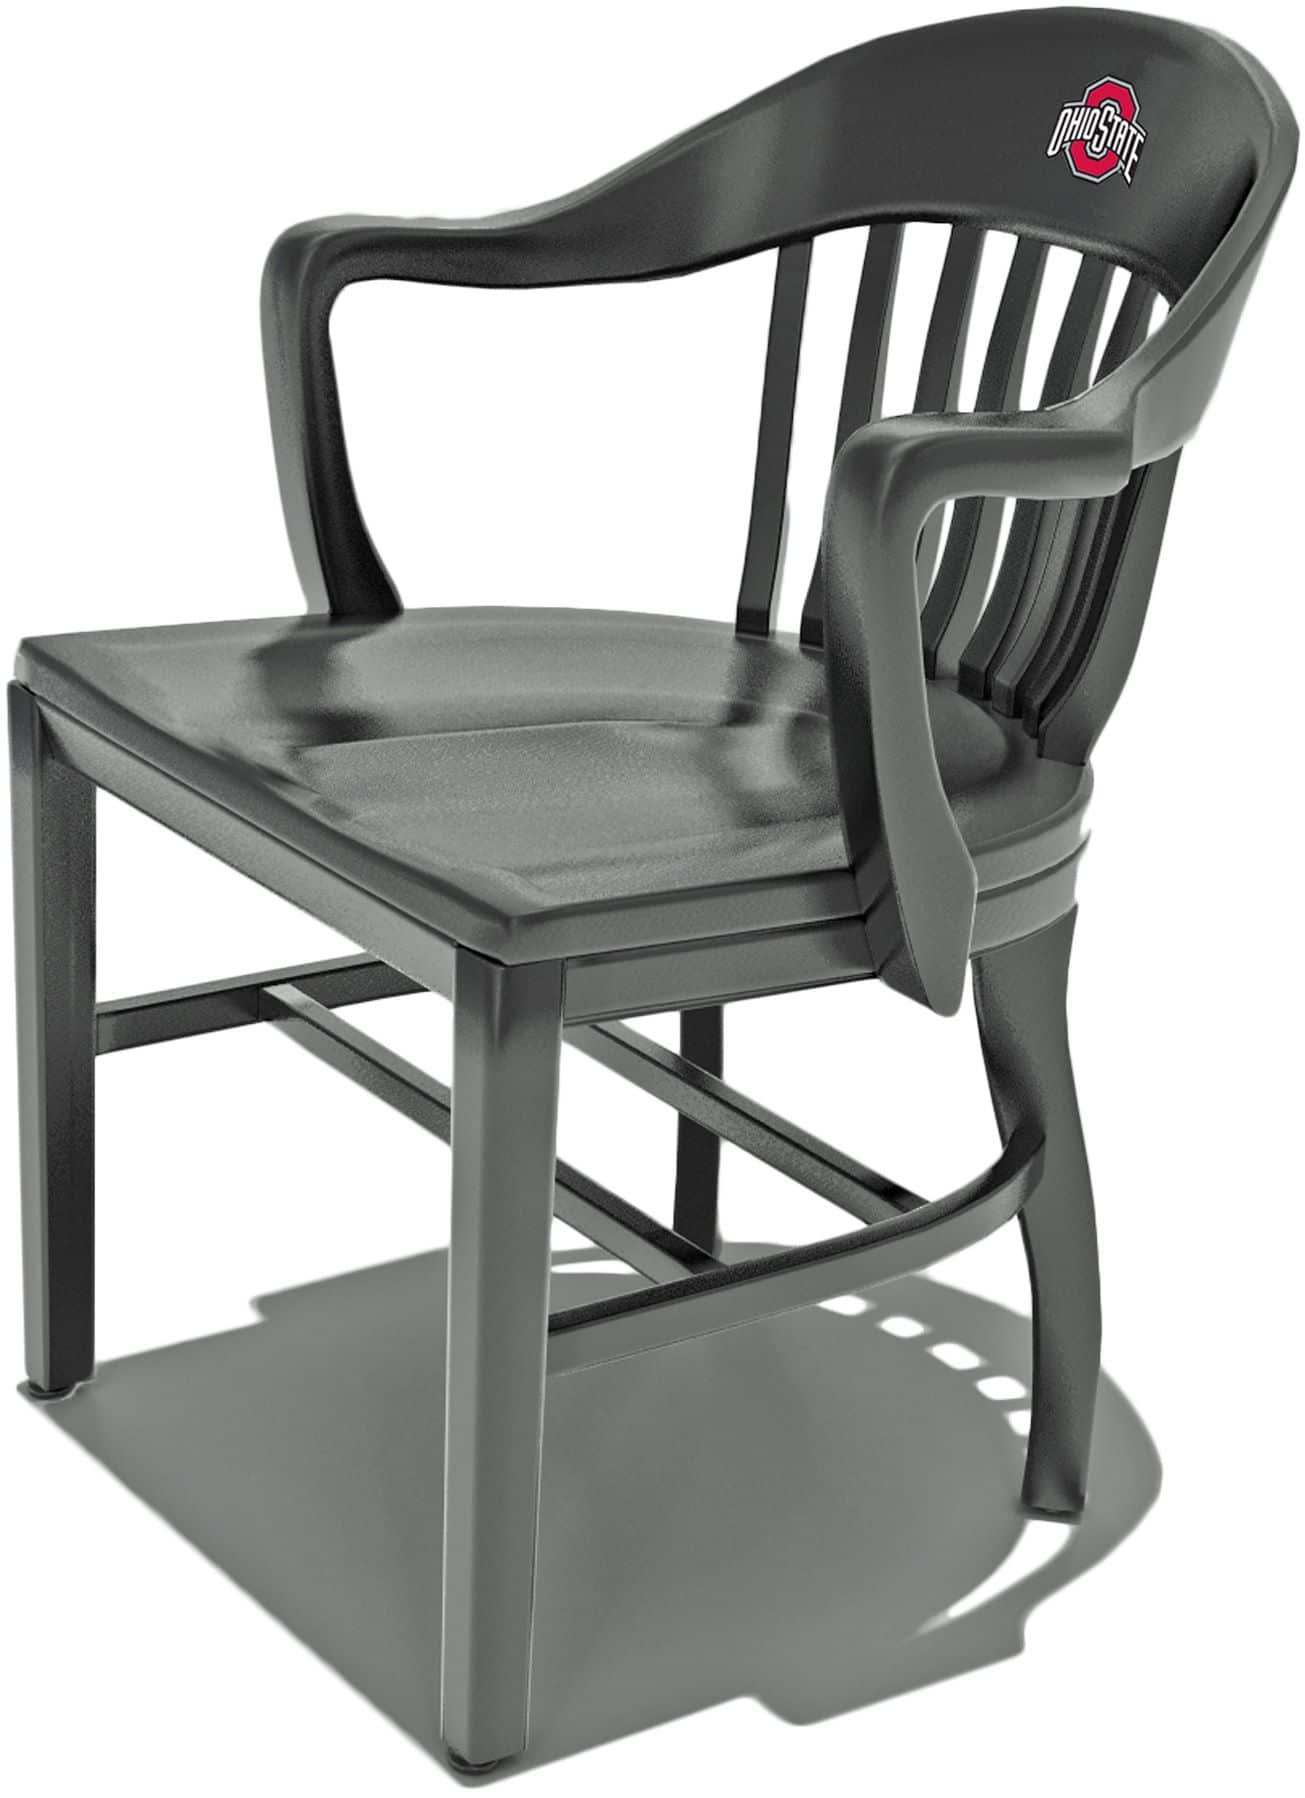 Ohio State Classic Alumni Chair with OSU Athletic logo on black captains chair